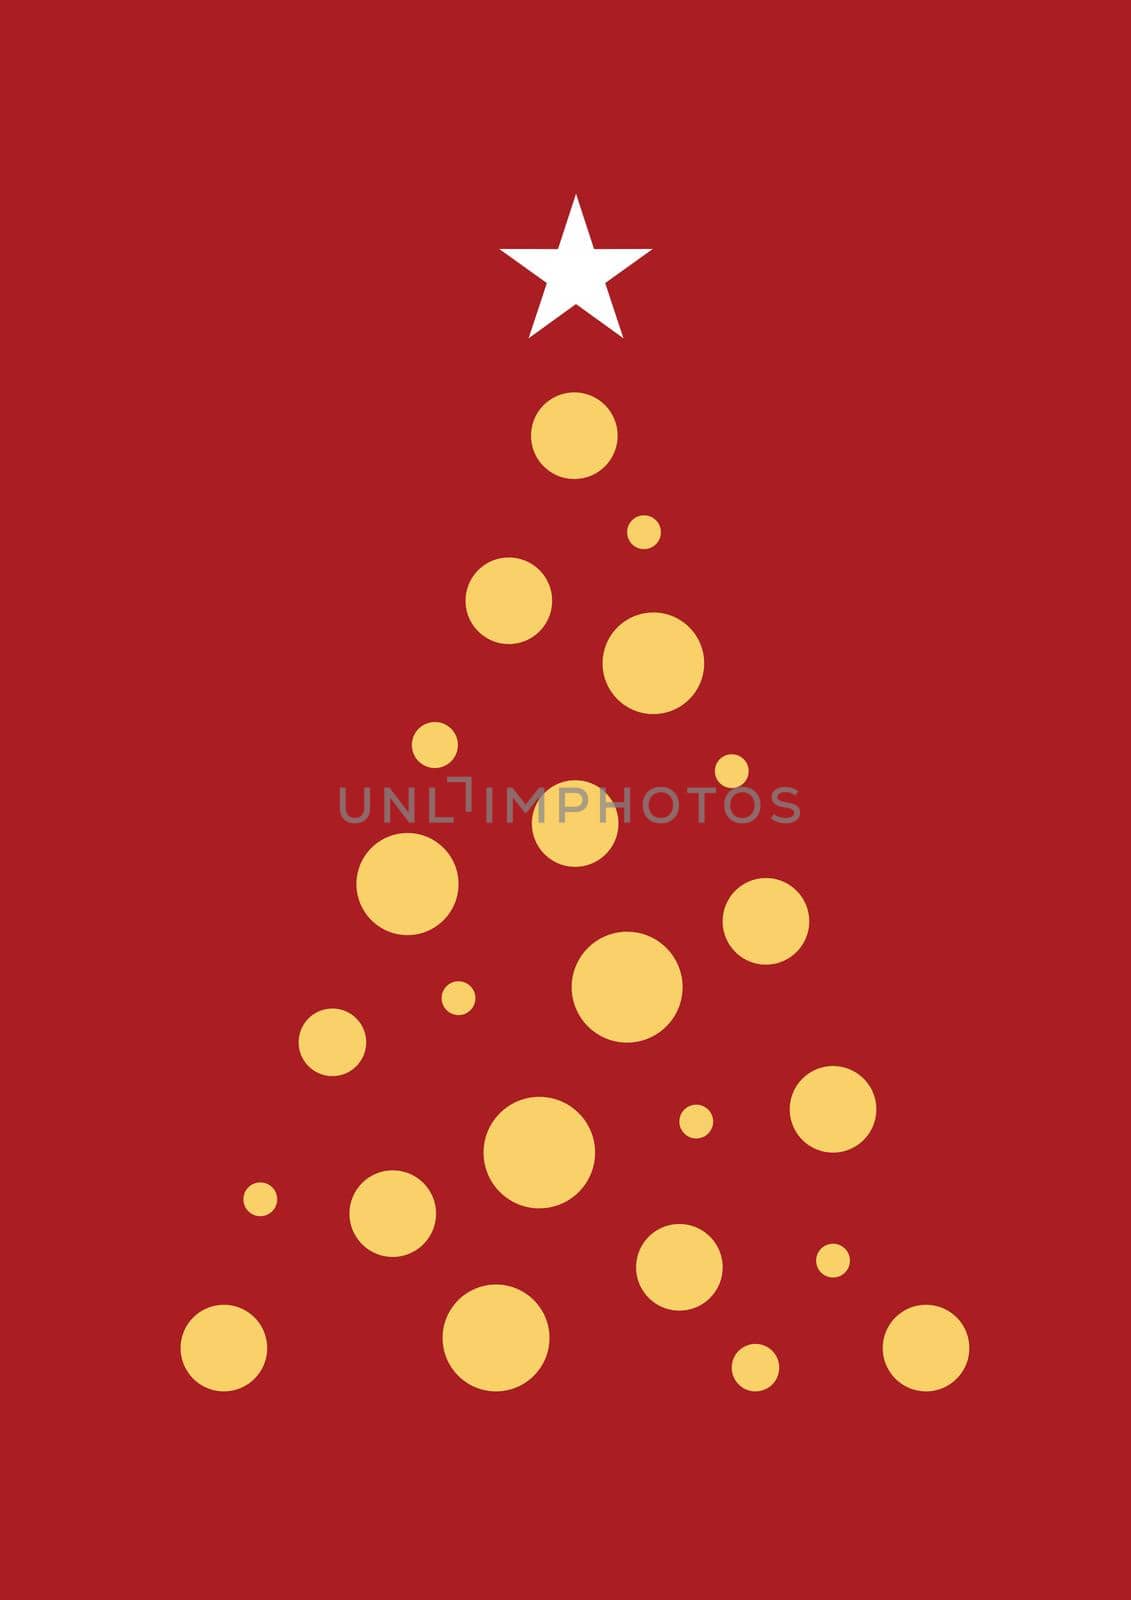 Vertical vector simple white Christmas tree with red card background by cougarsan